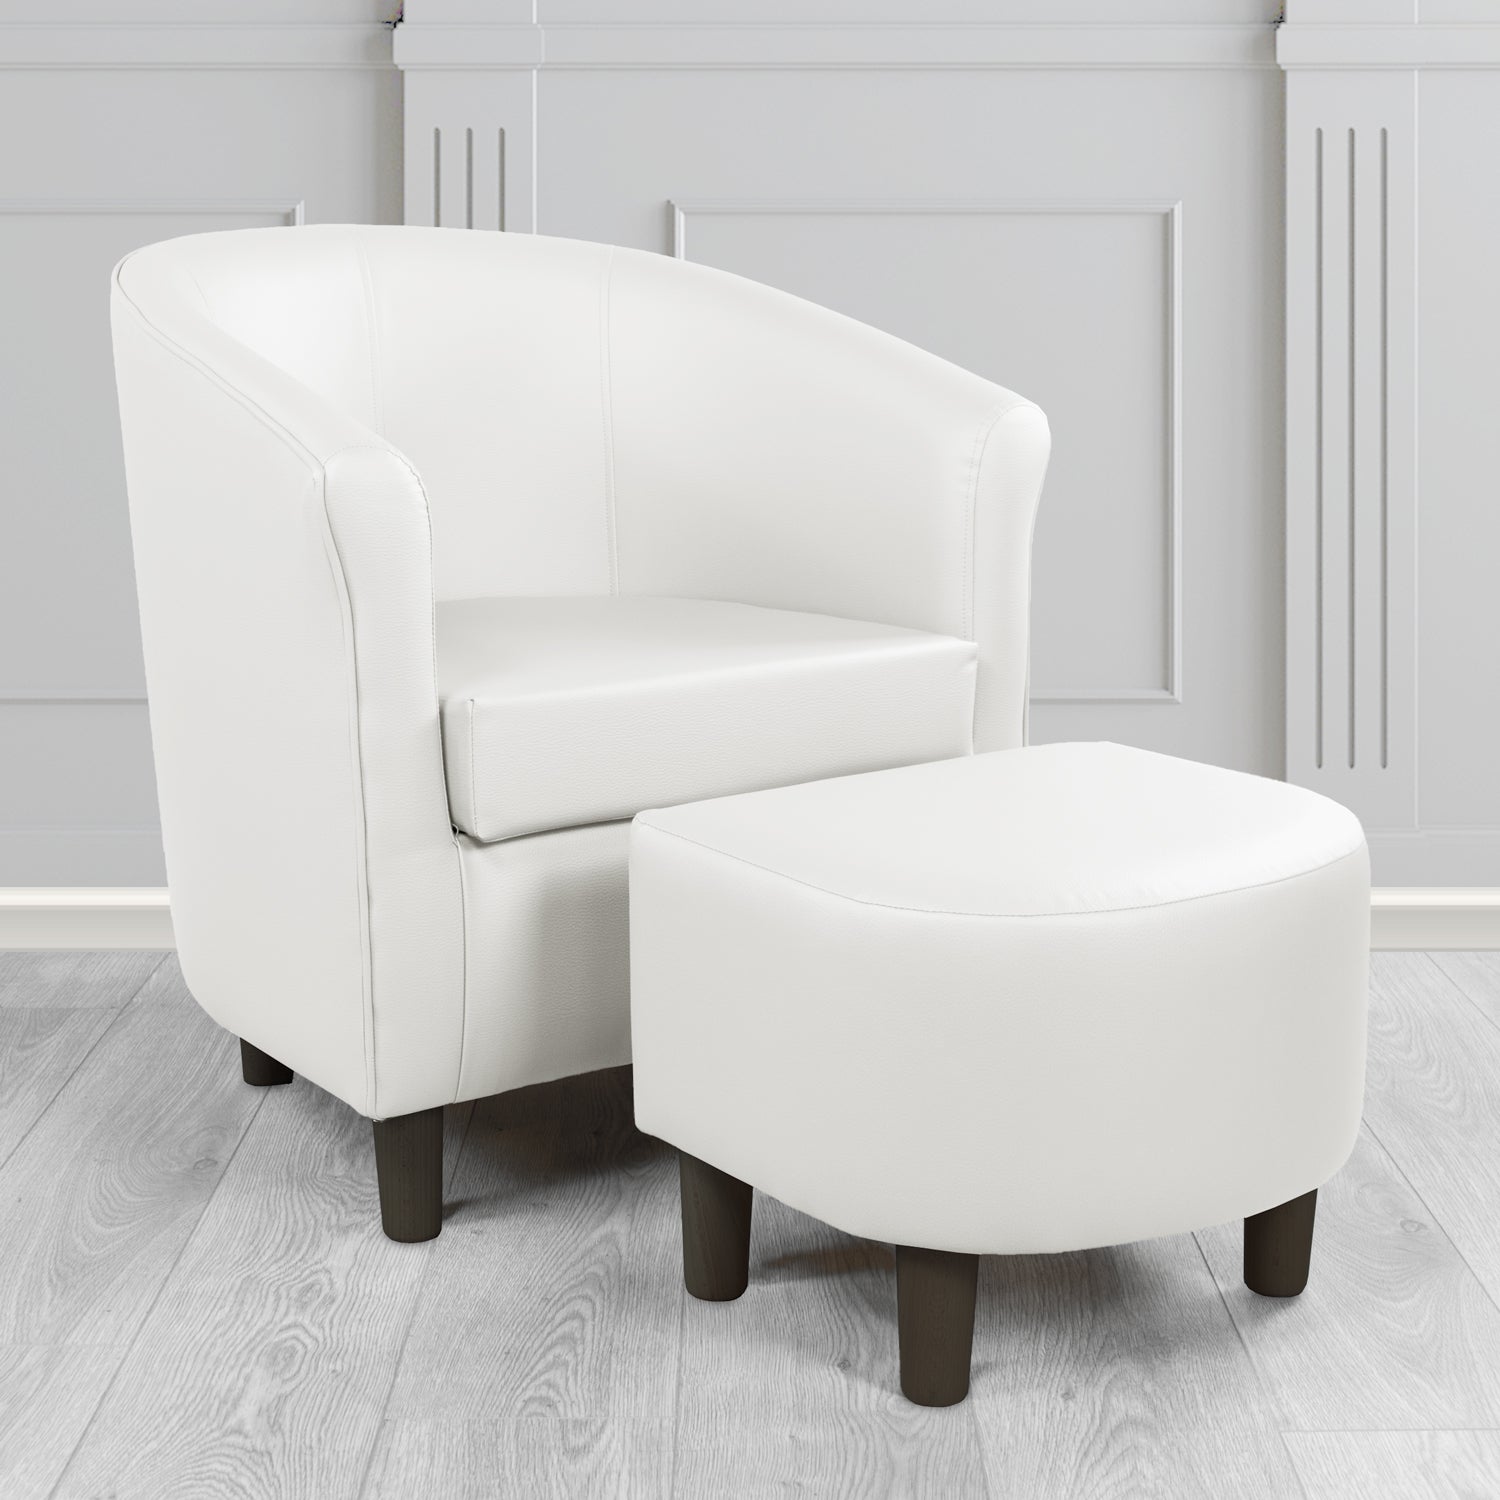 Tuscany Tub Chair with Footstool Set in Madrid White Faux Leather - The Tub Chair Shop